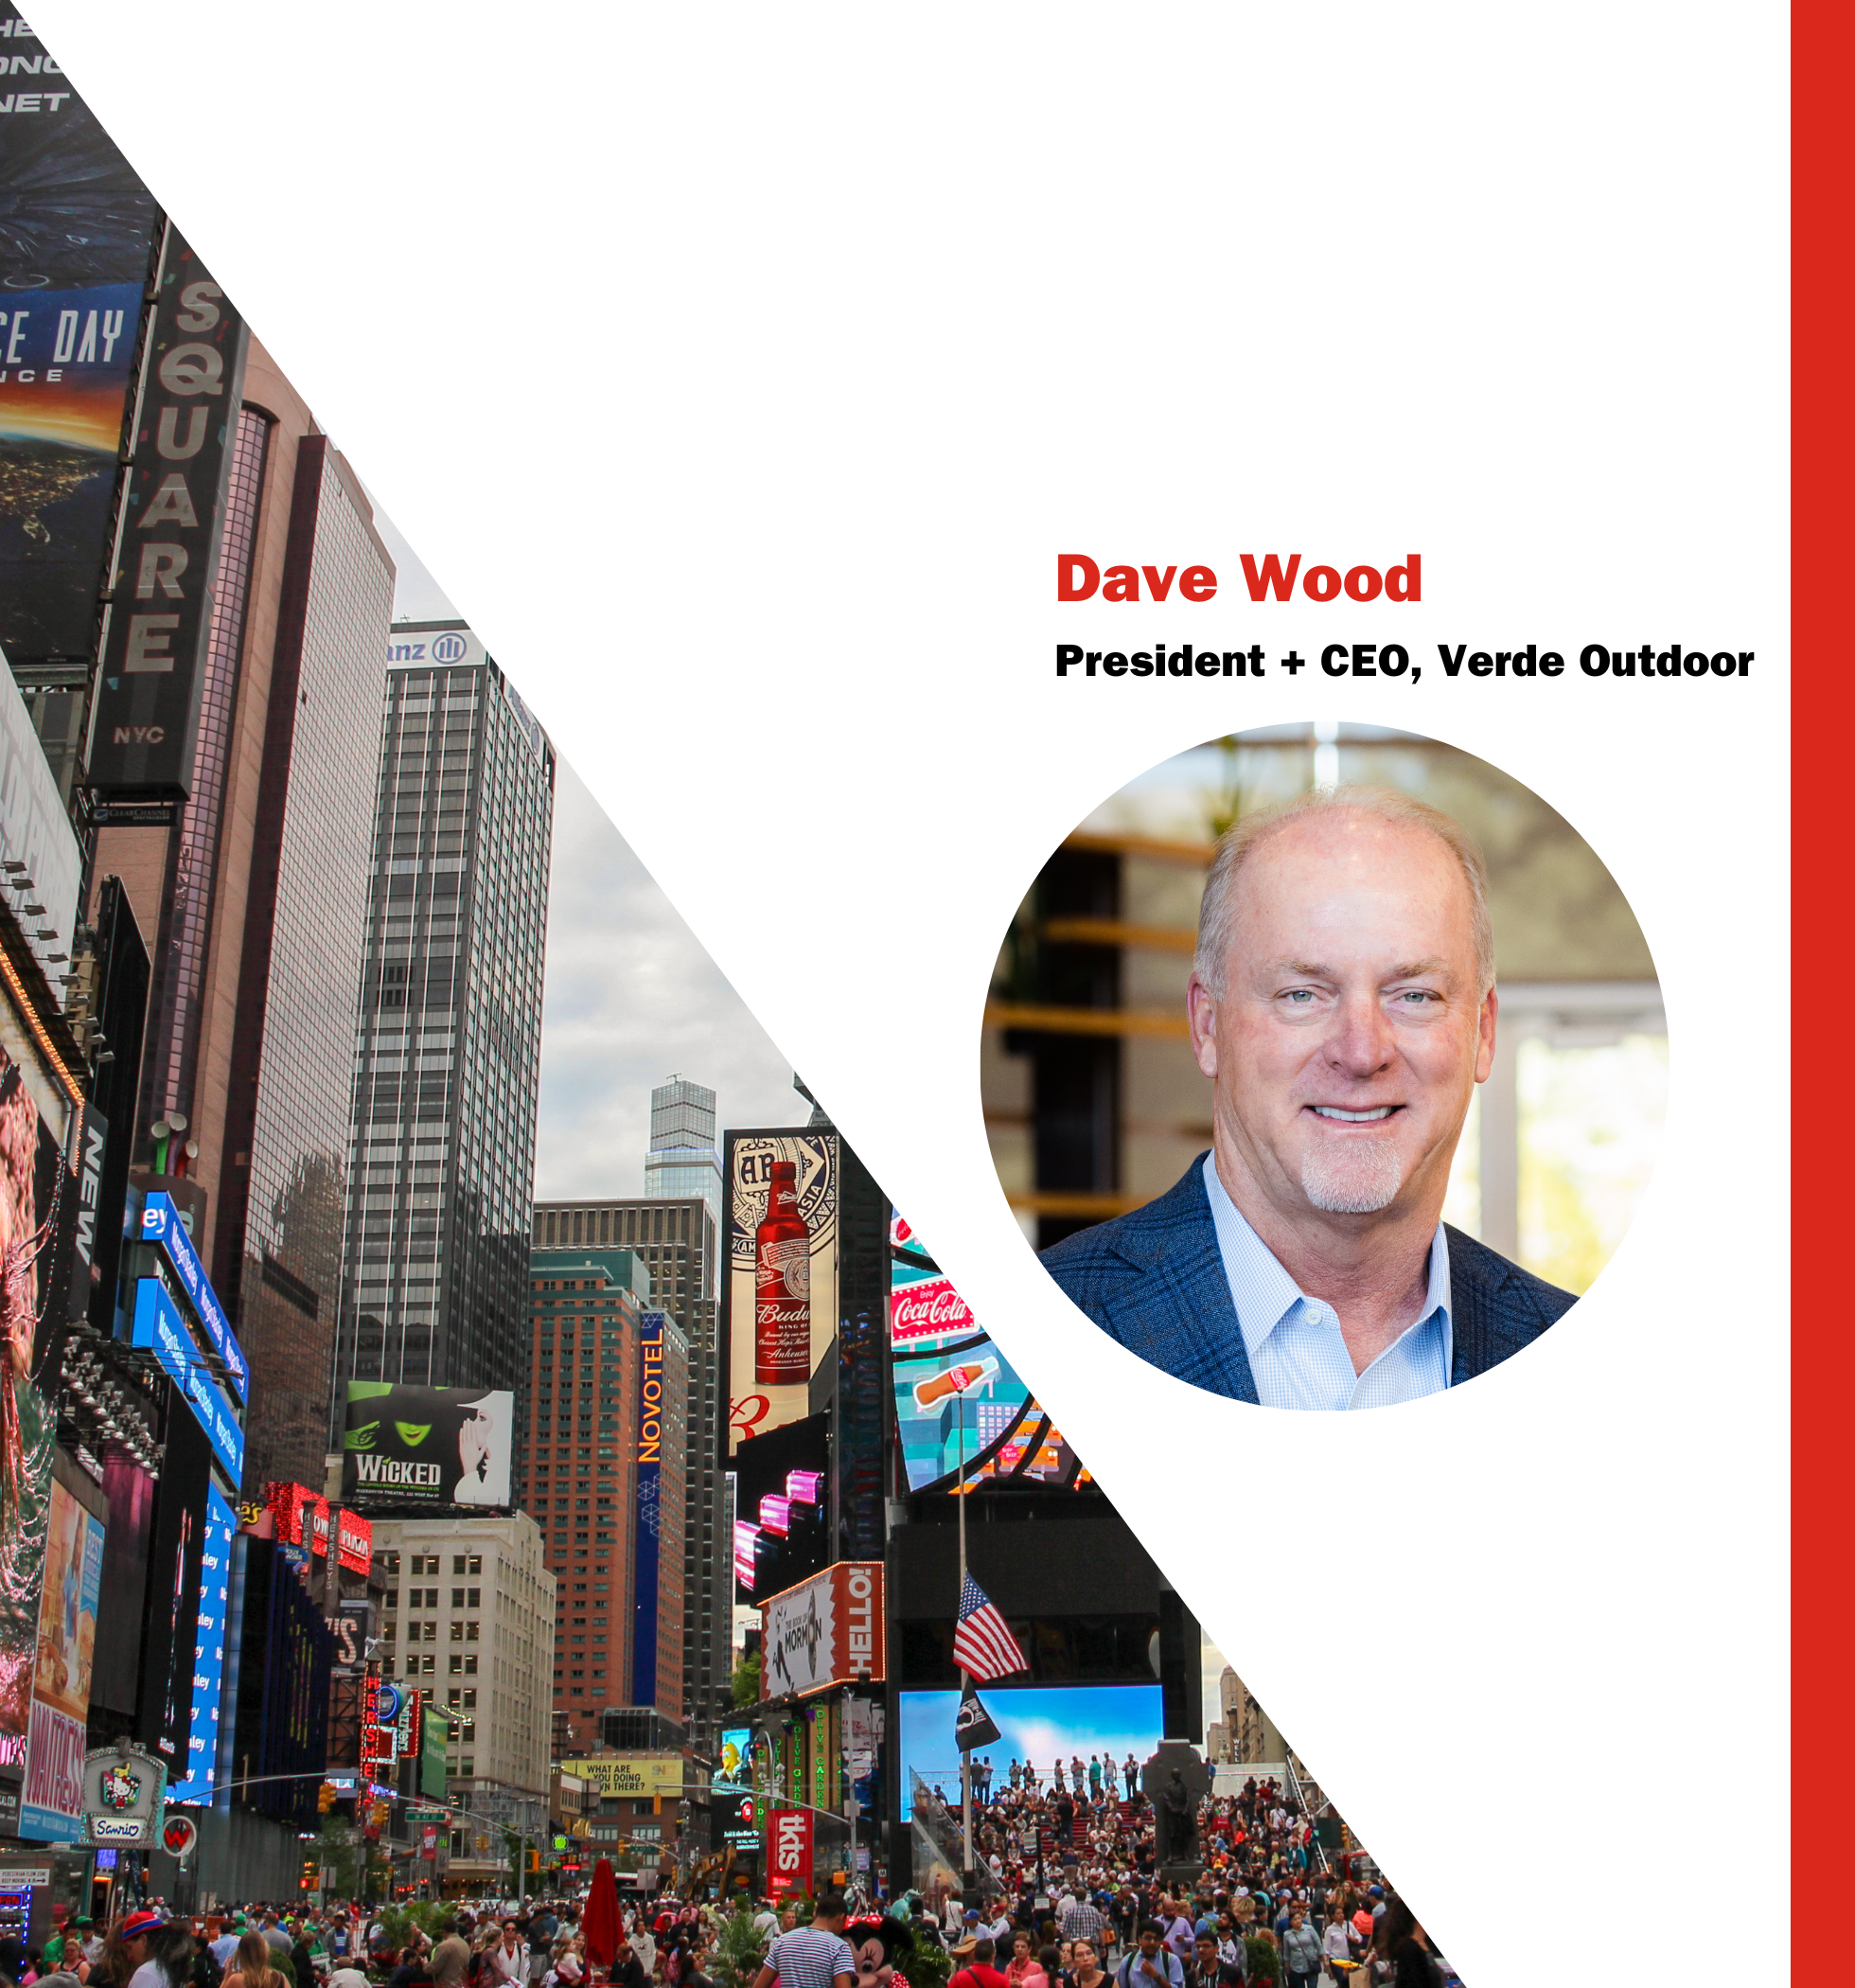 Across The Desk with Verde Outdoor’s Dave Wood